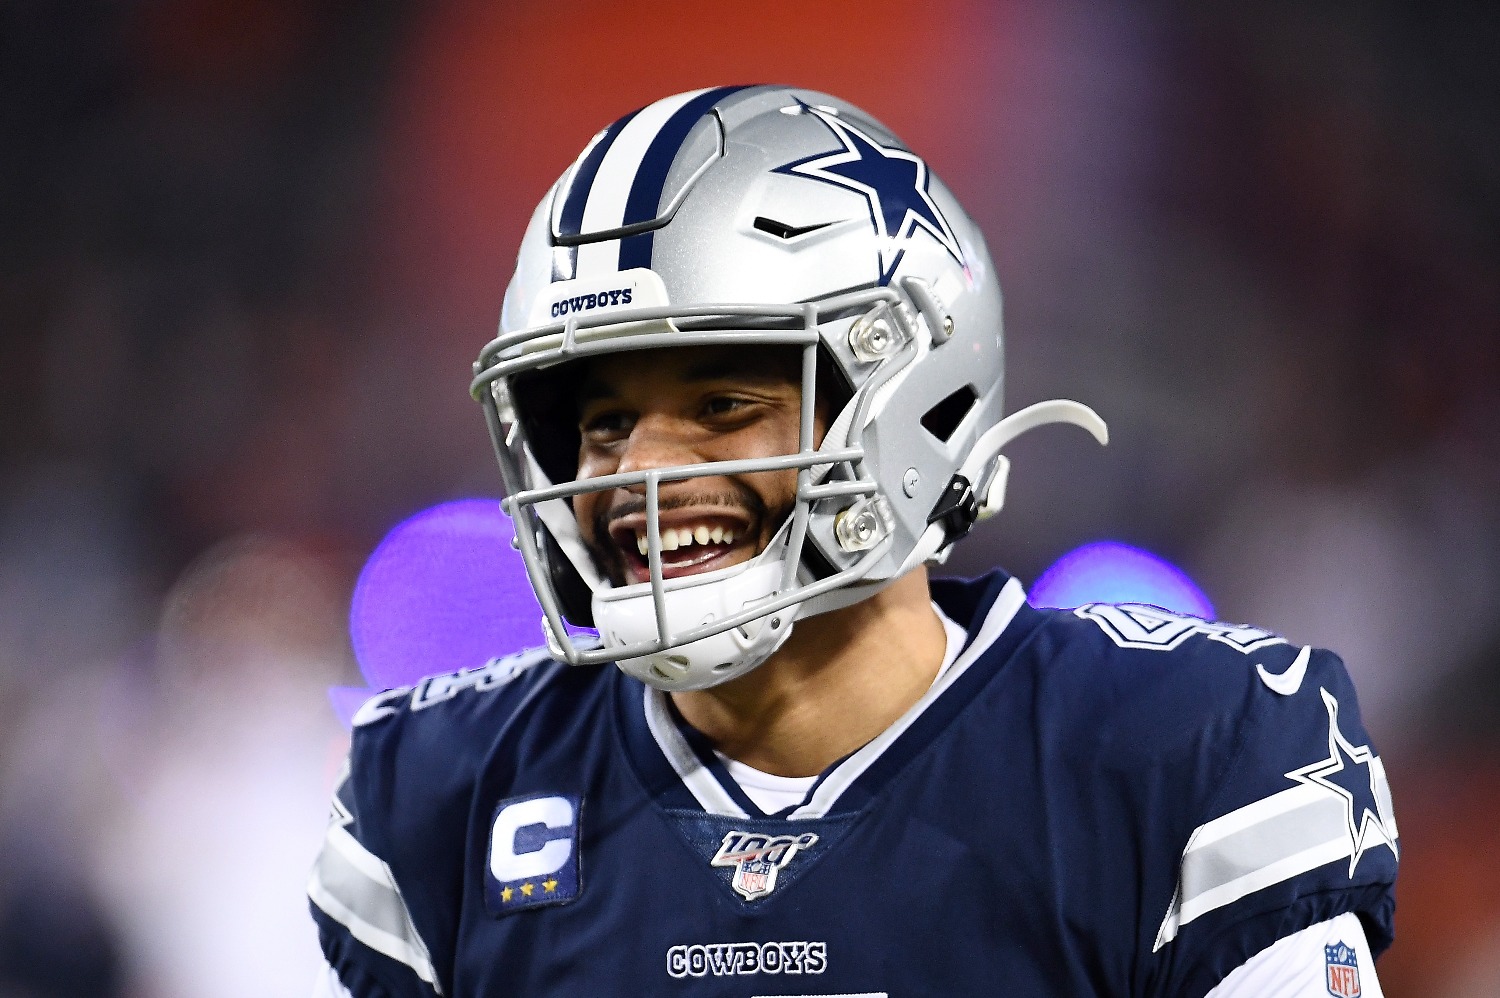 With Deshaun Watson setting the market for quarterback contracts, Cowboys QB Dak Prescott just enjoyed a $160 million day at the office.